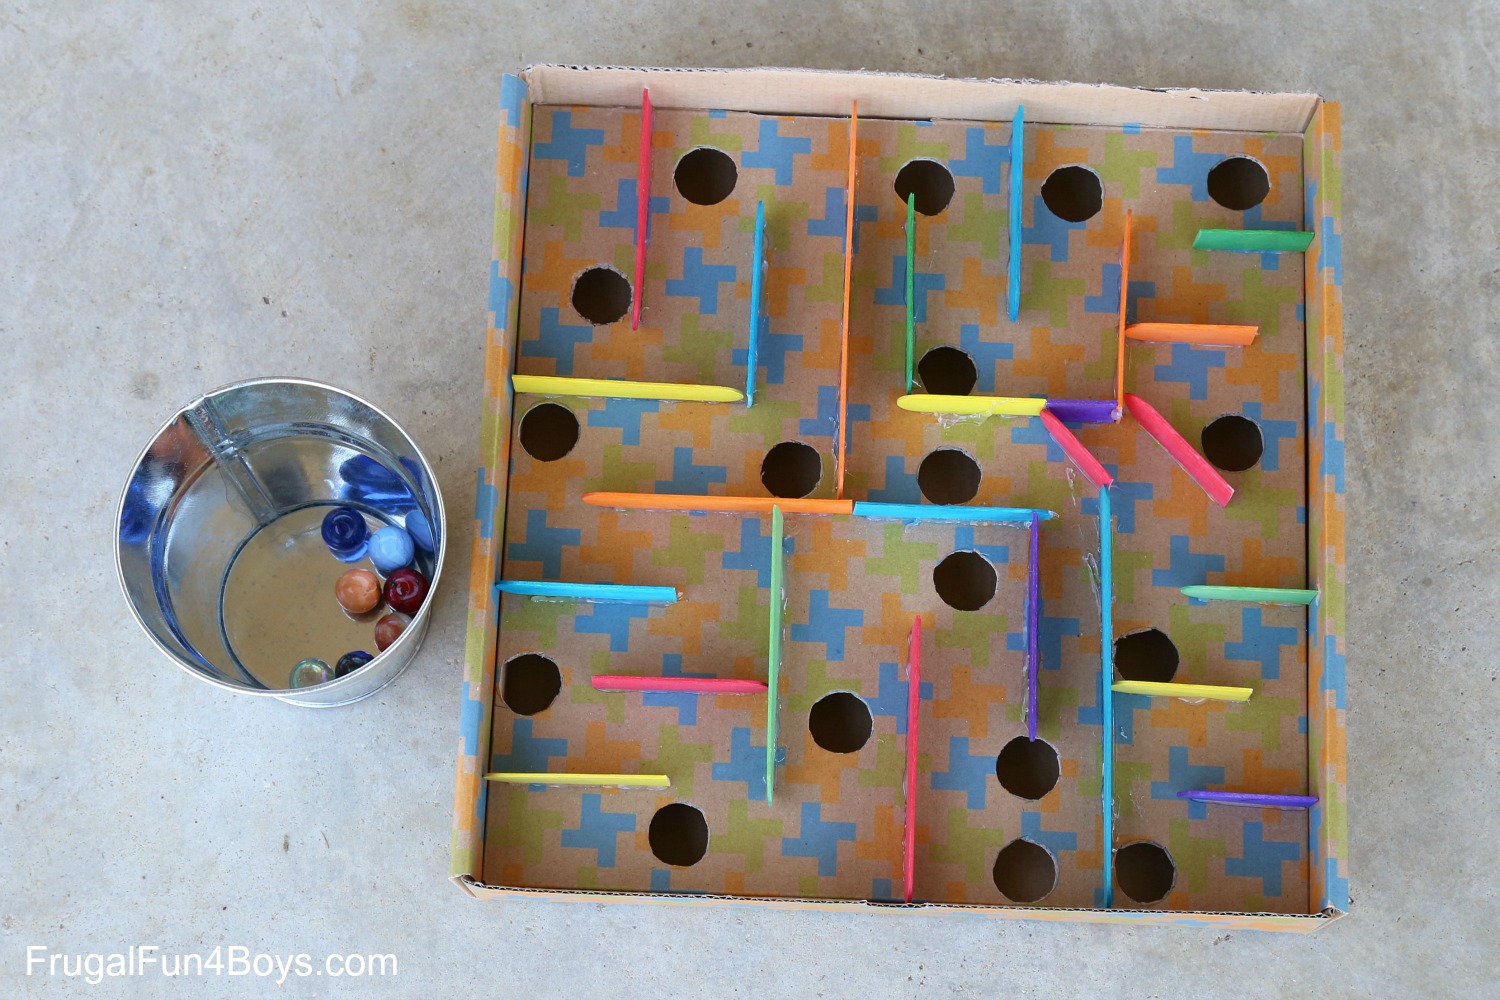 How to Make a Cardboard Box Marble Labyrinth